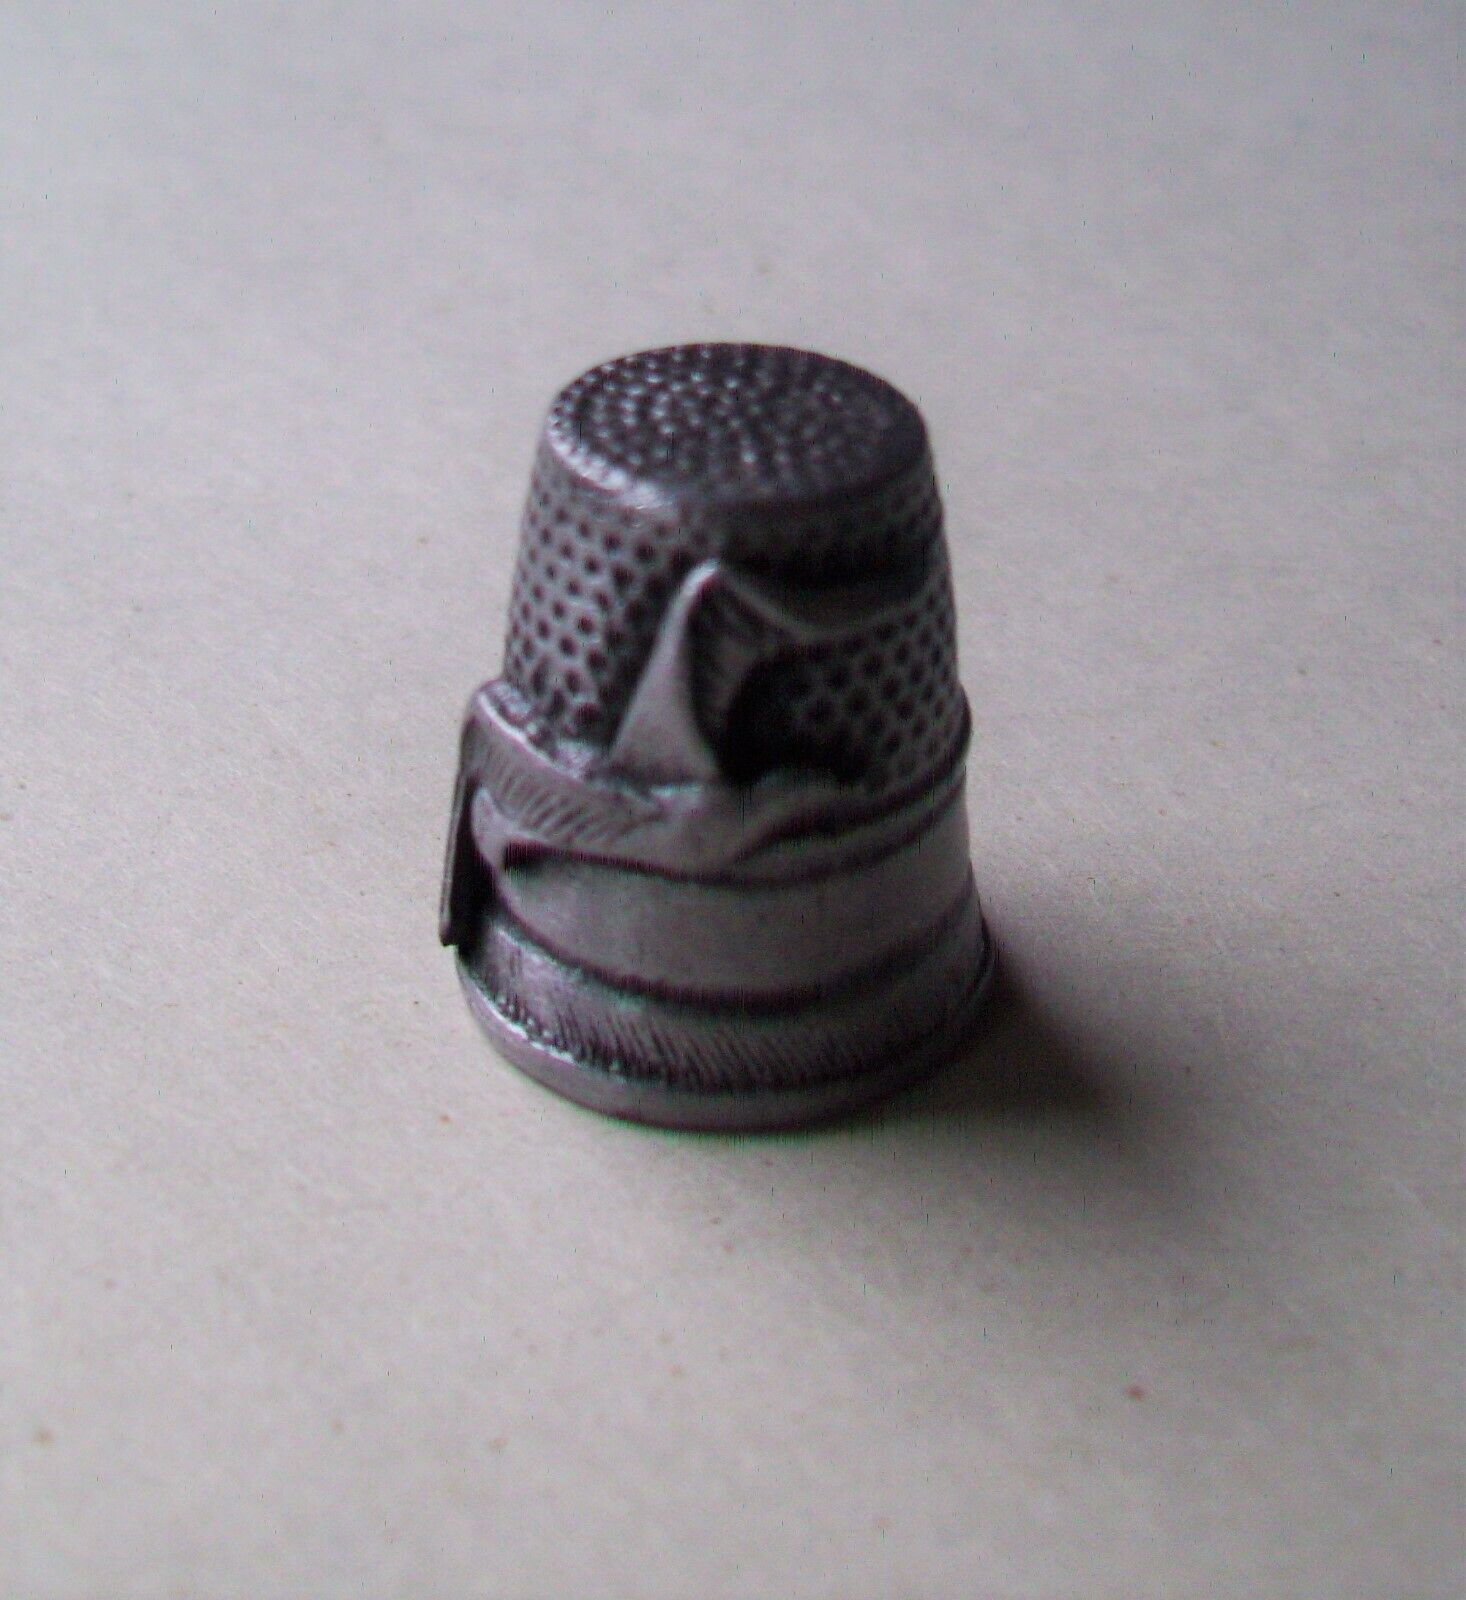 PEWTER THIMBLE   WITH A FLYING SEAGULL  DESIGN